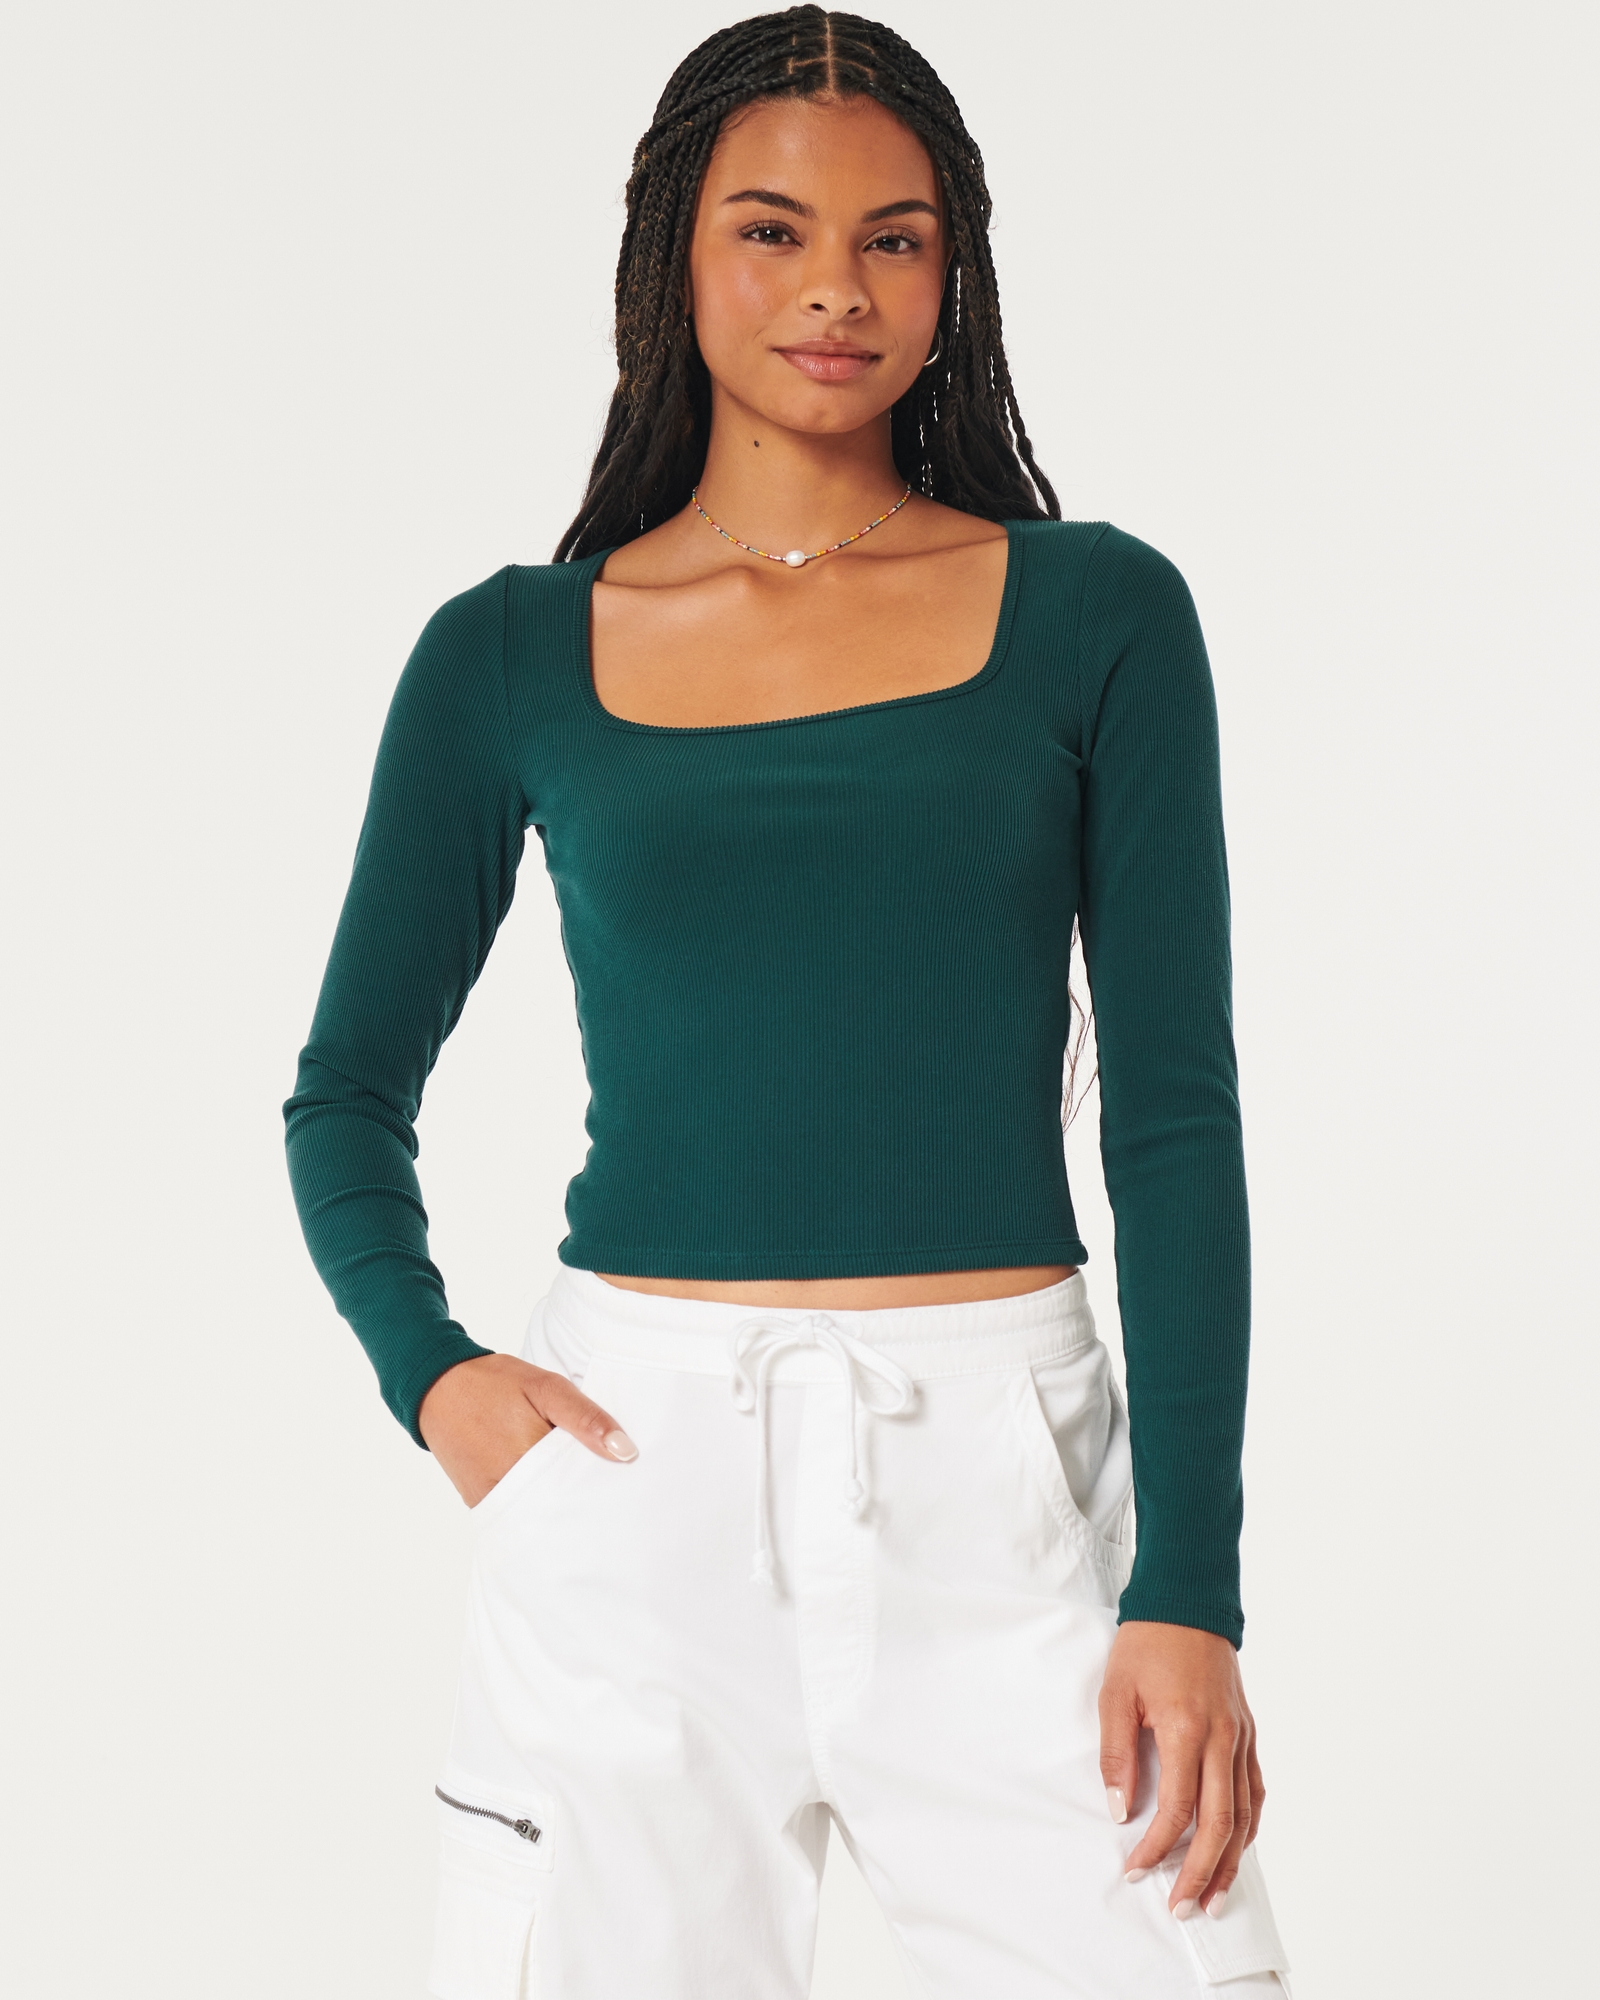 Women's Ribbed Seamless Fabric Square-Neck Top, Women's Clearance